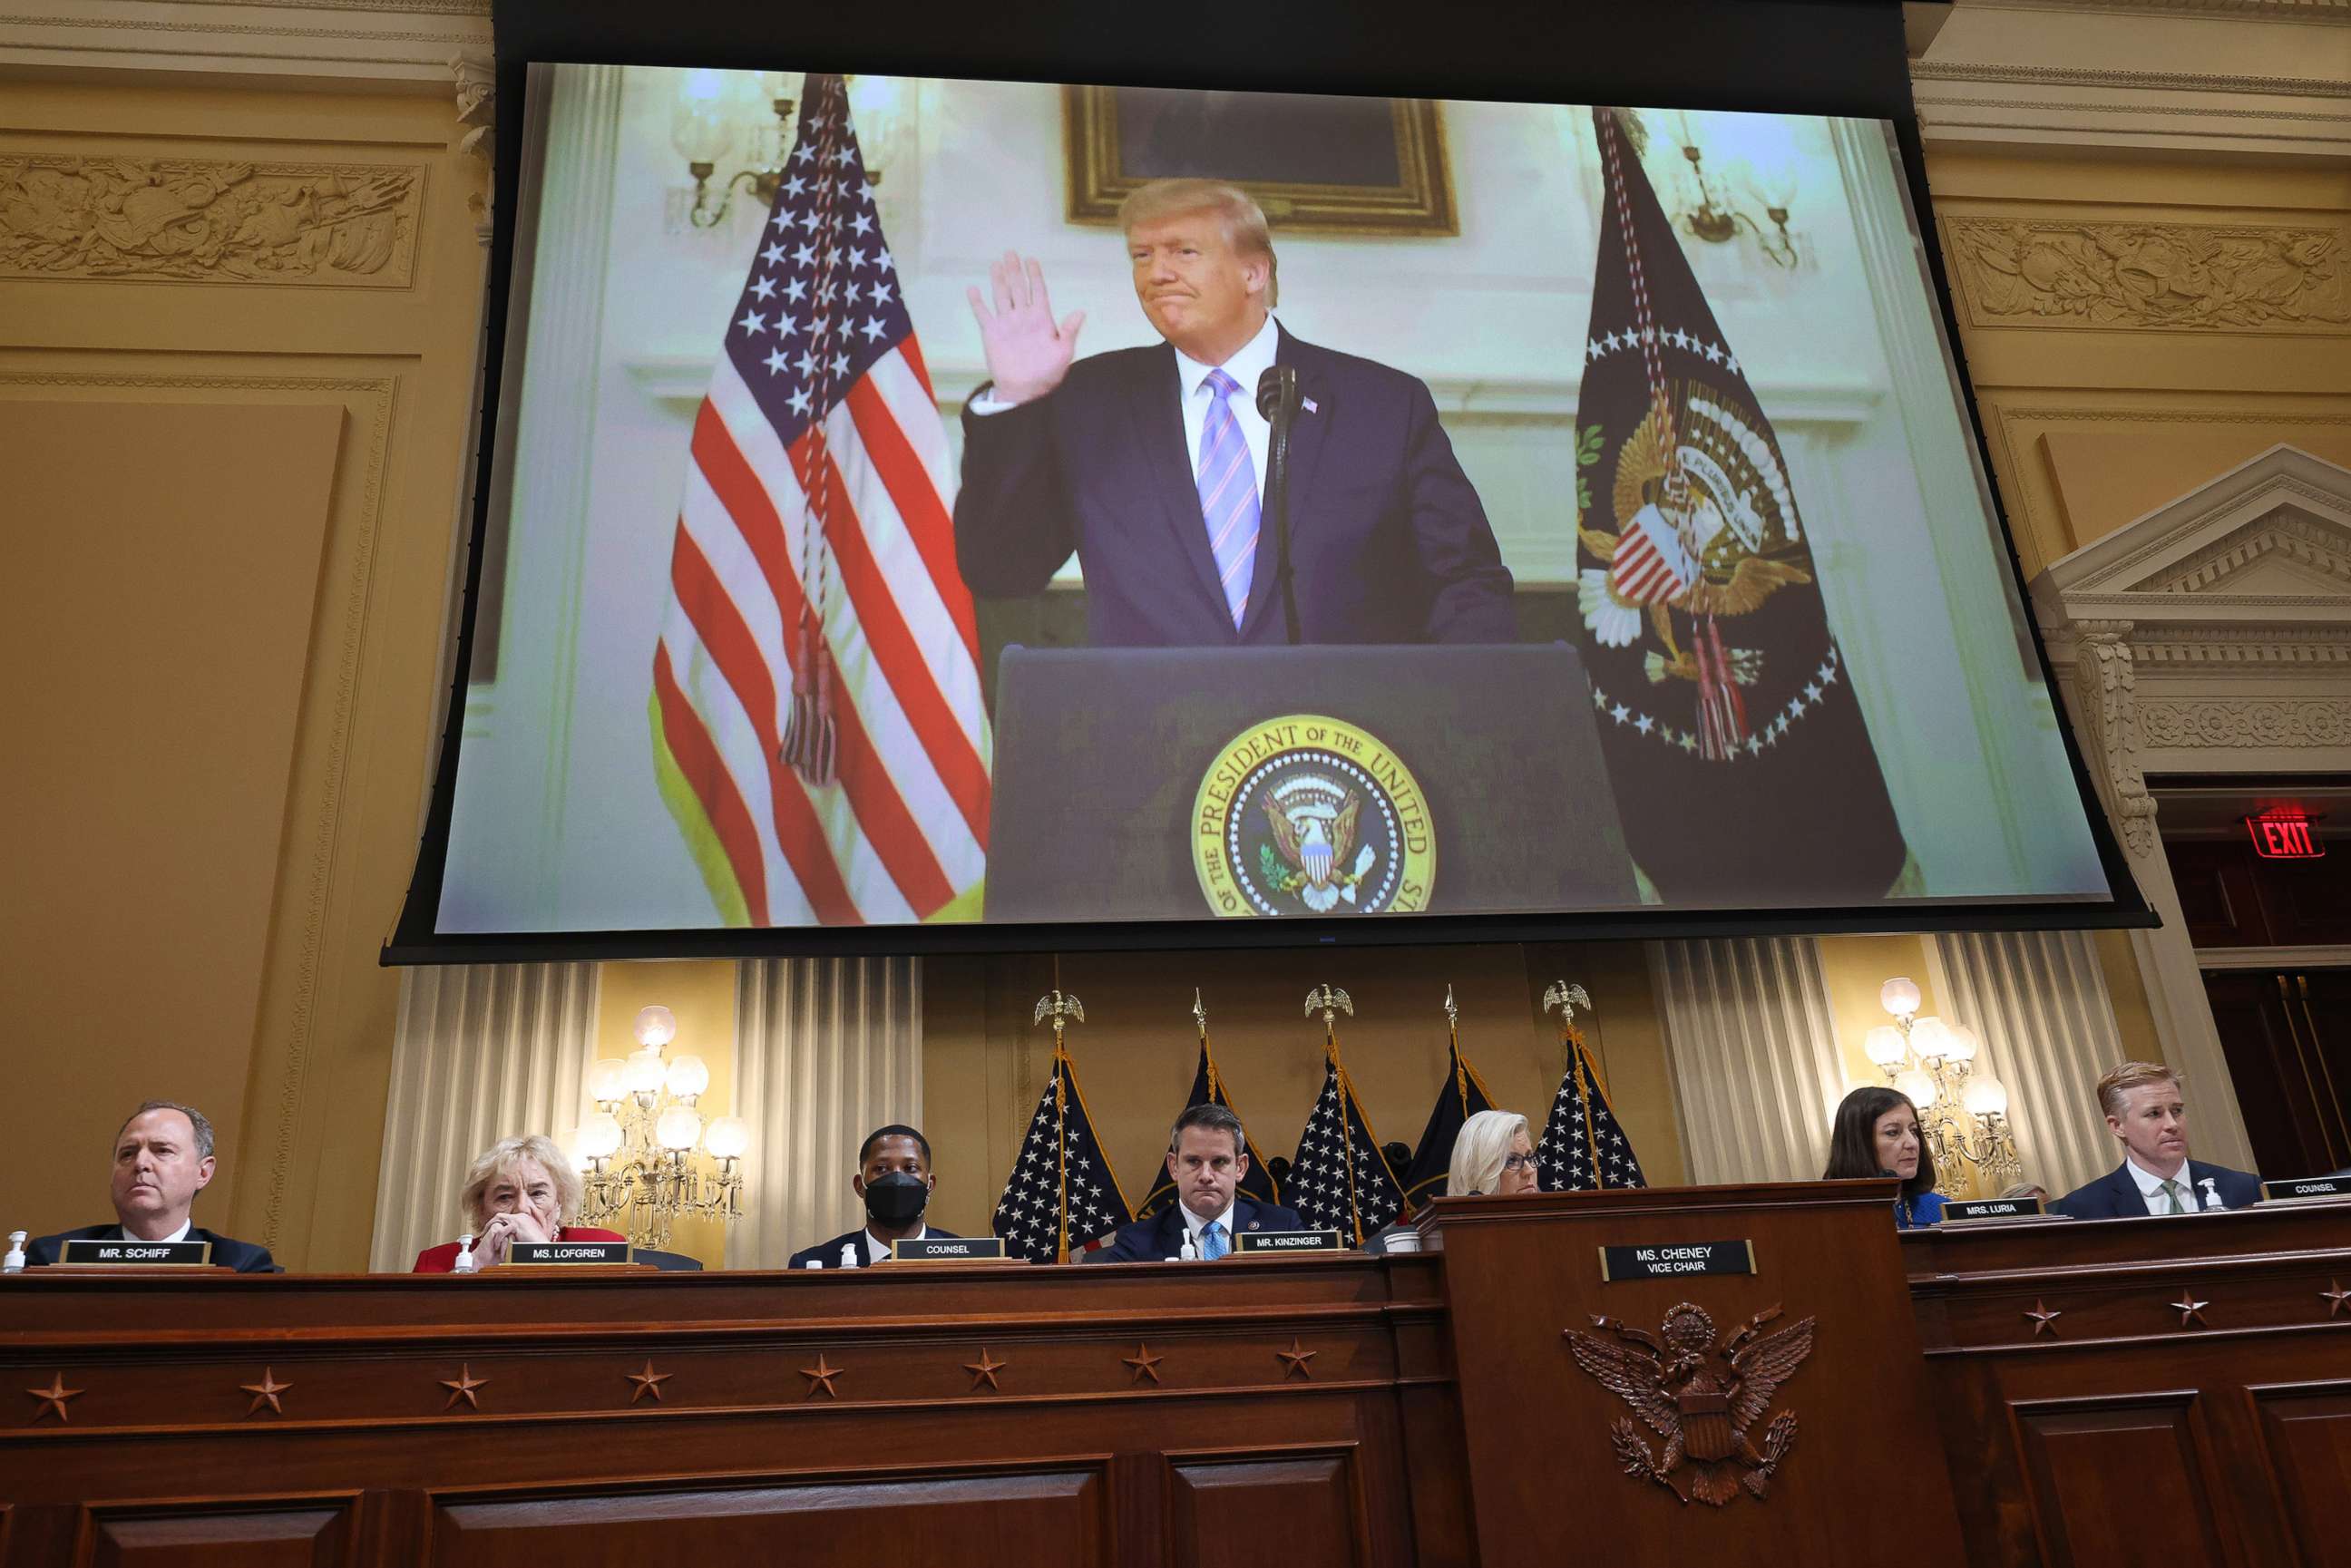 PHOTO: A video of former US President Donald Trump recording an address to the nation on January 7, 2021, is displayed on a screen during a hearing in Washington, July 21, 2022.